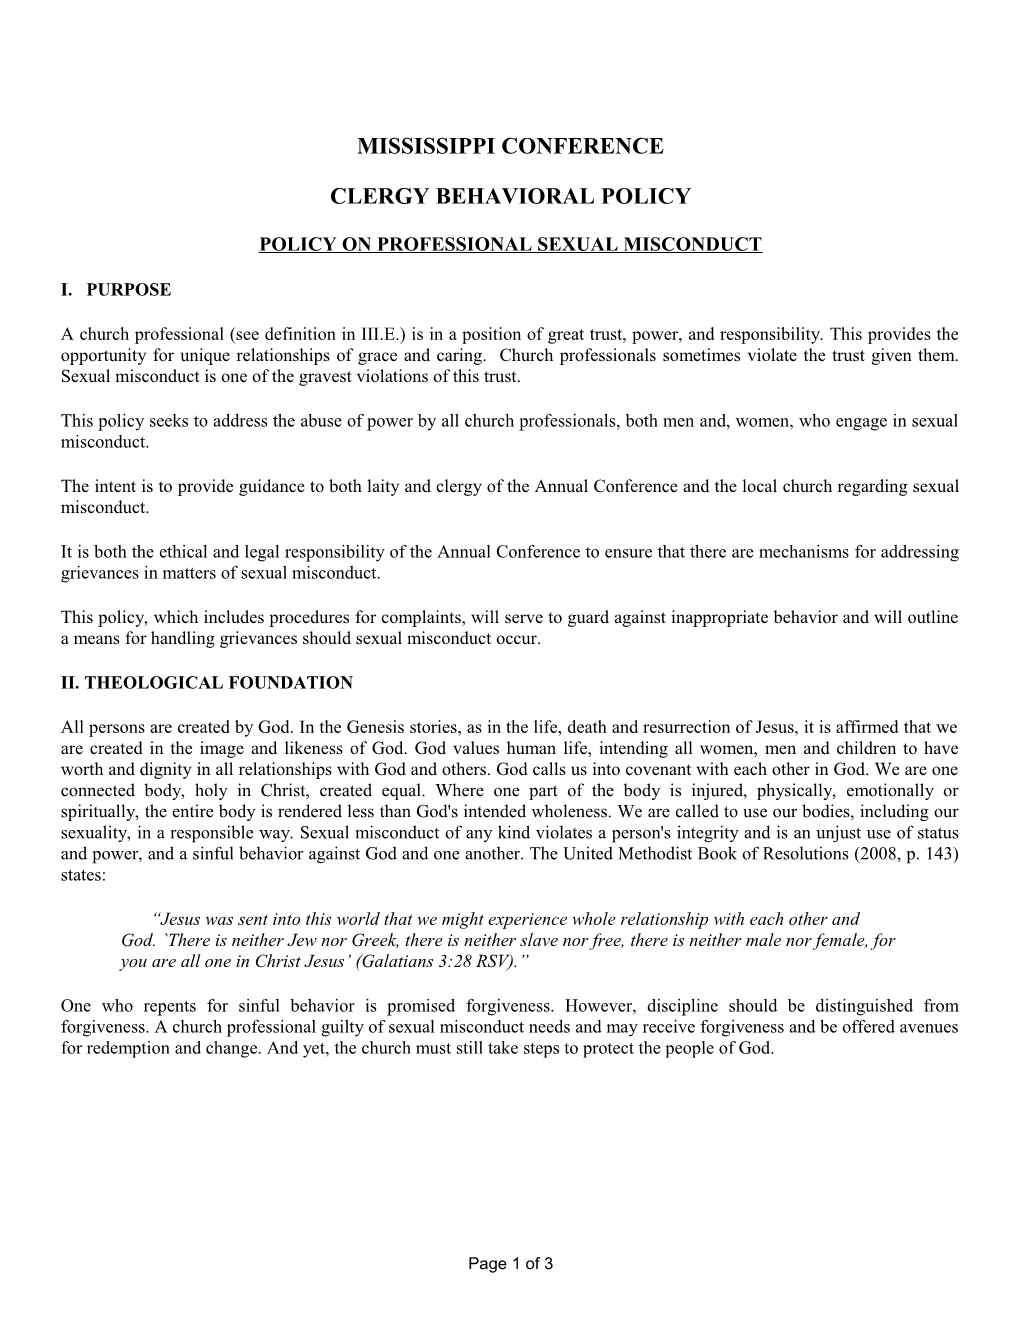 MS Conference Clergy Behavioral Policy Adopted 2005